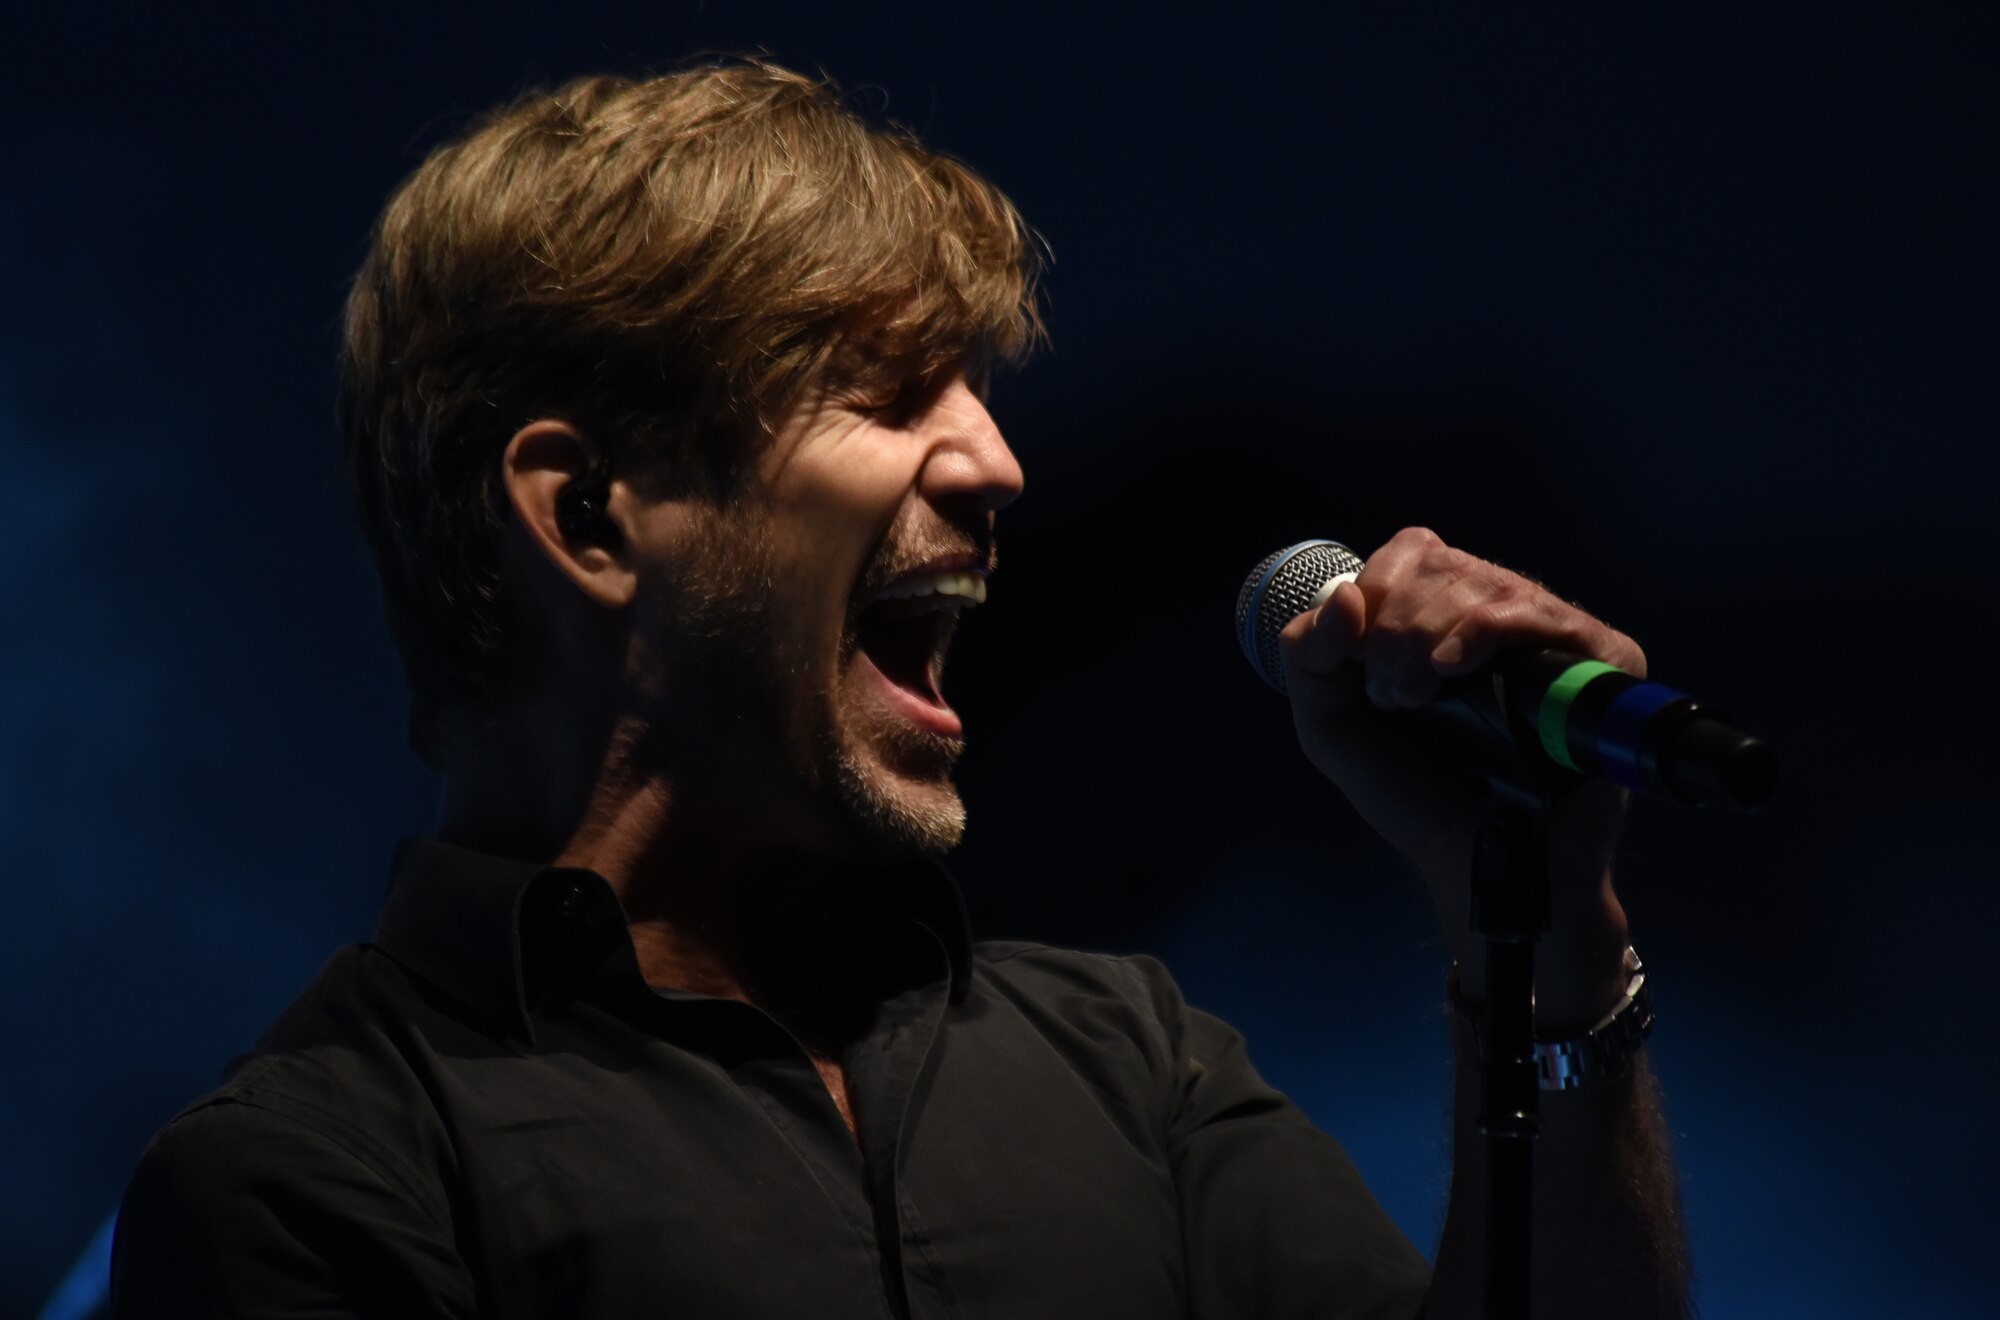 Jeff Vezain, Lt. Dan Band lead singer, sings during a concert at Tyndall Air Force Base, Fla., March 4, 2018. (U.S. Air Force photo by Airman 1st Class Solomon Cook/Released)